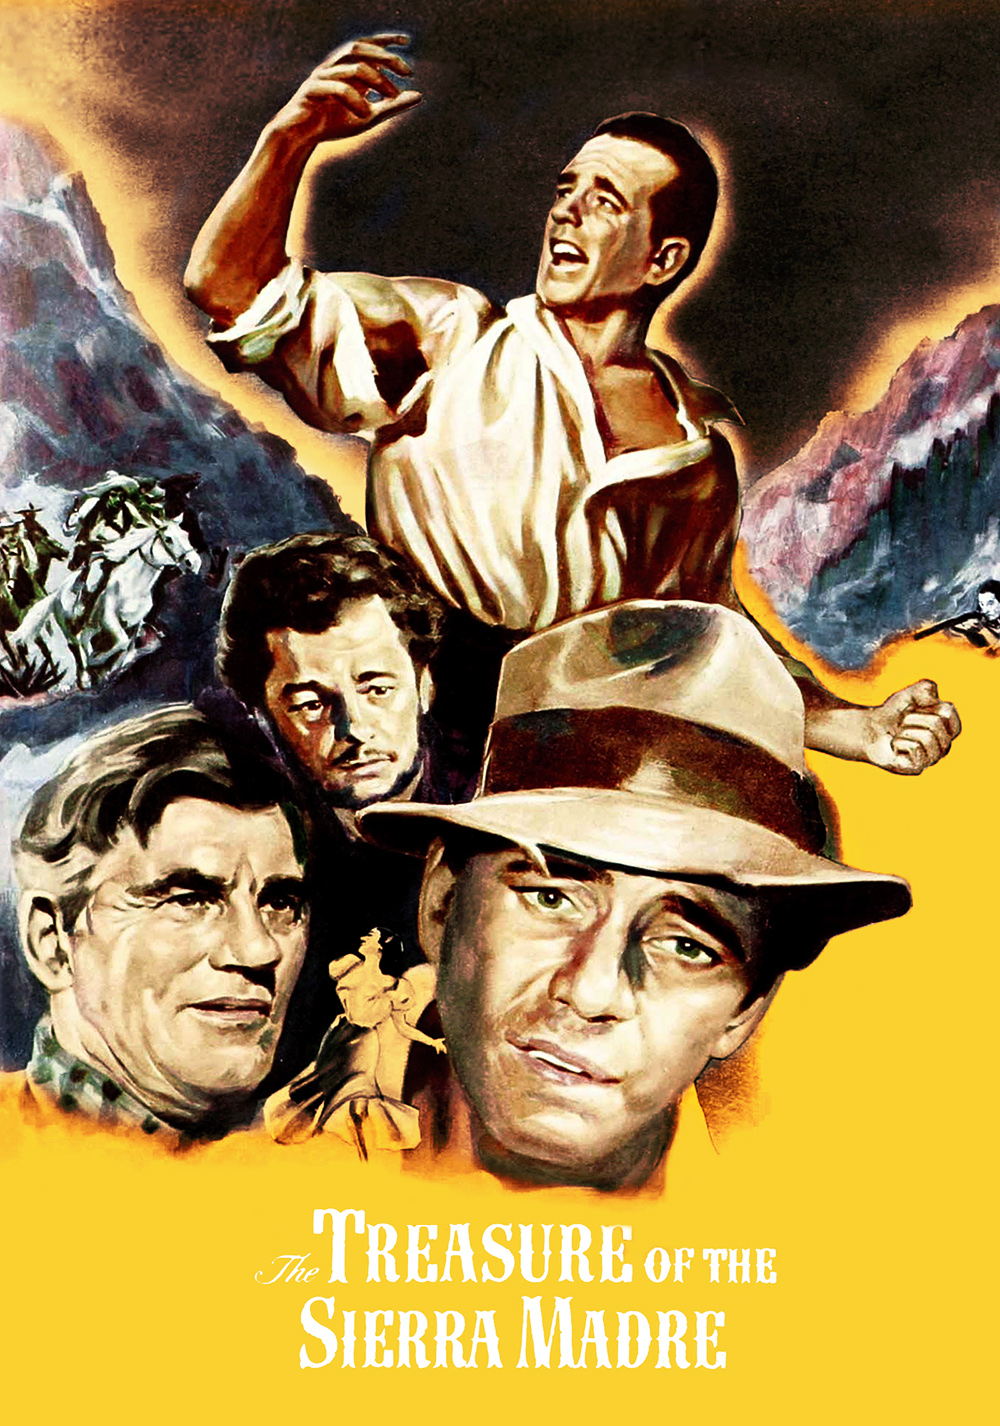 The Treasure of the Sierra Madre Images. 